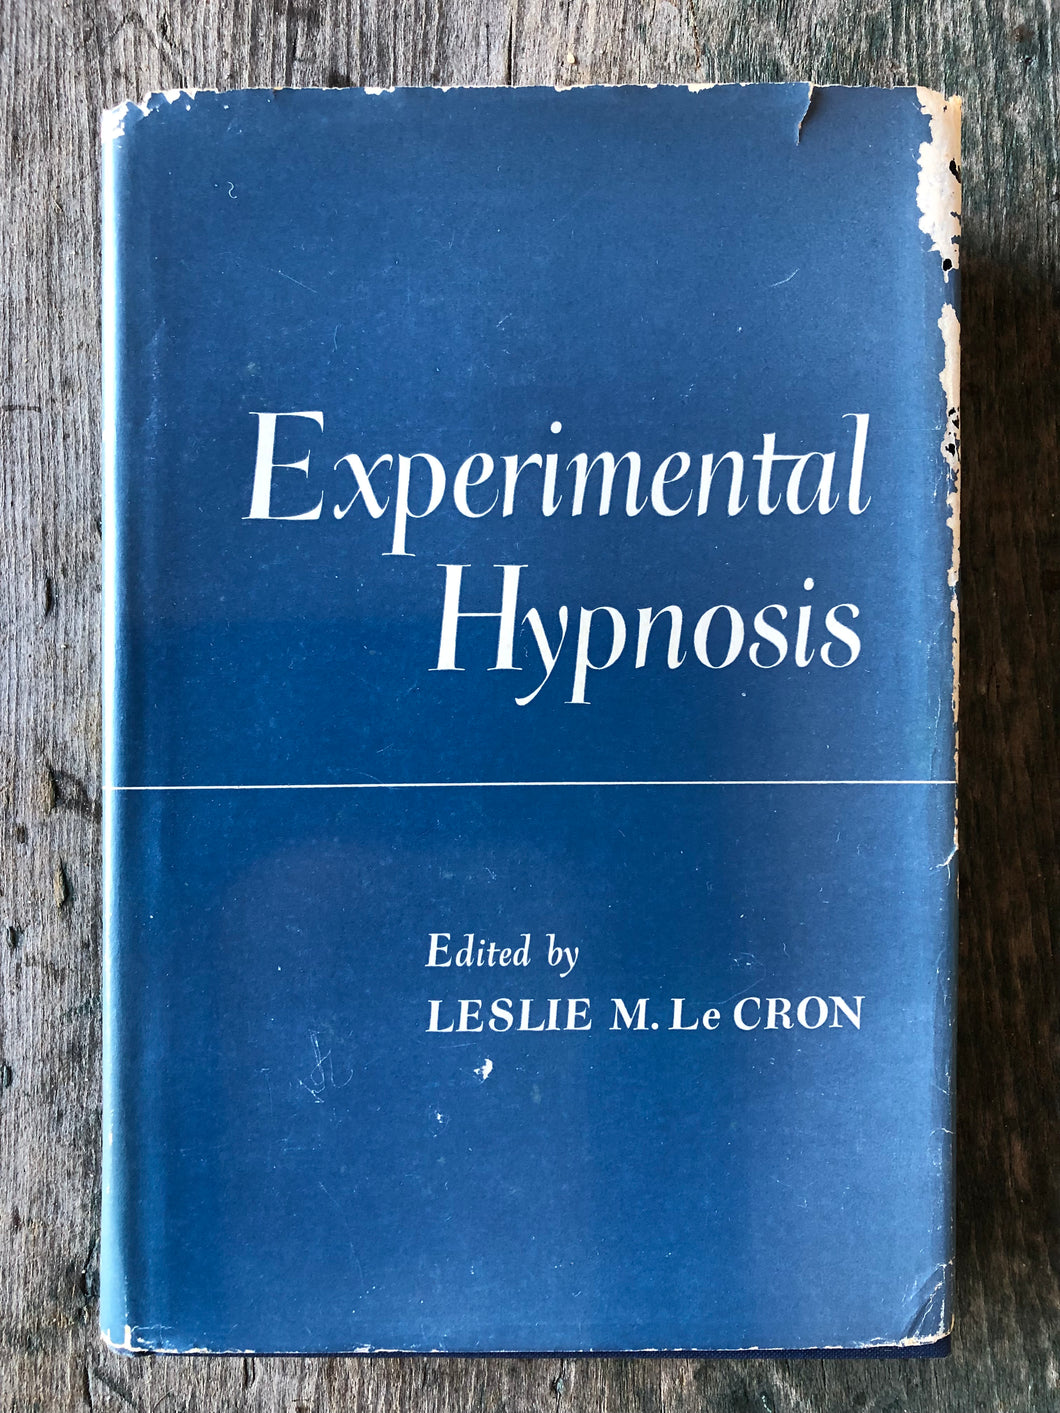 Experimental Hypnosis: A Symposium of Articles on Research by Many of the Worlds Leading Authorities edited by Leslie M. LeCron